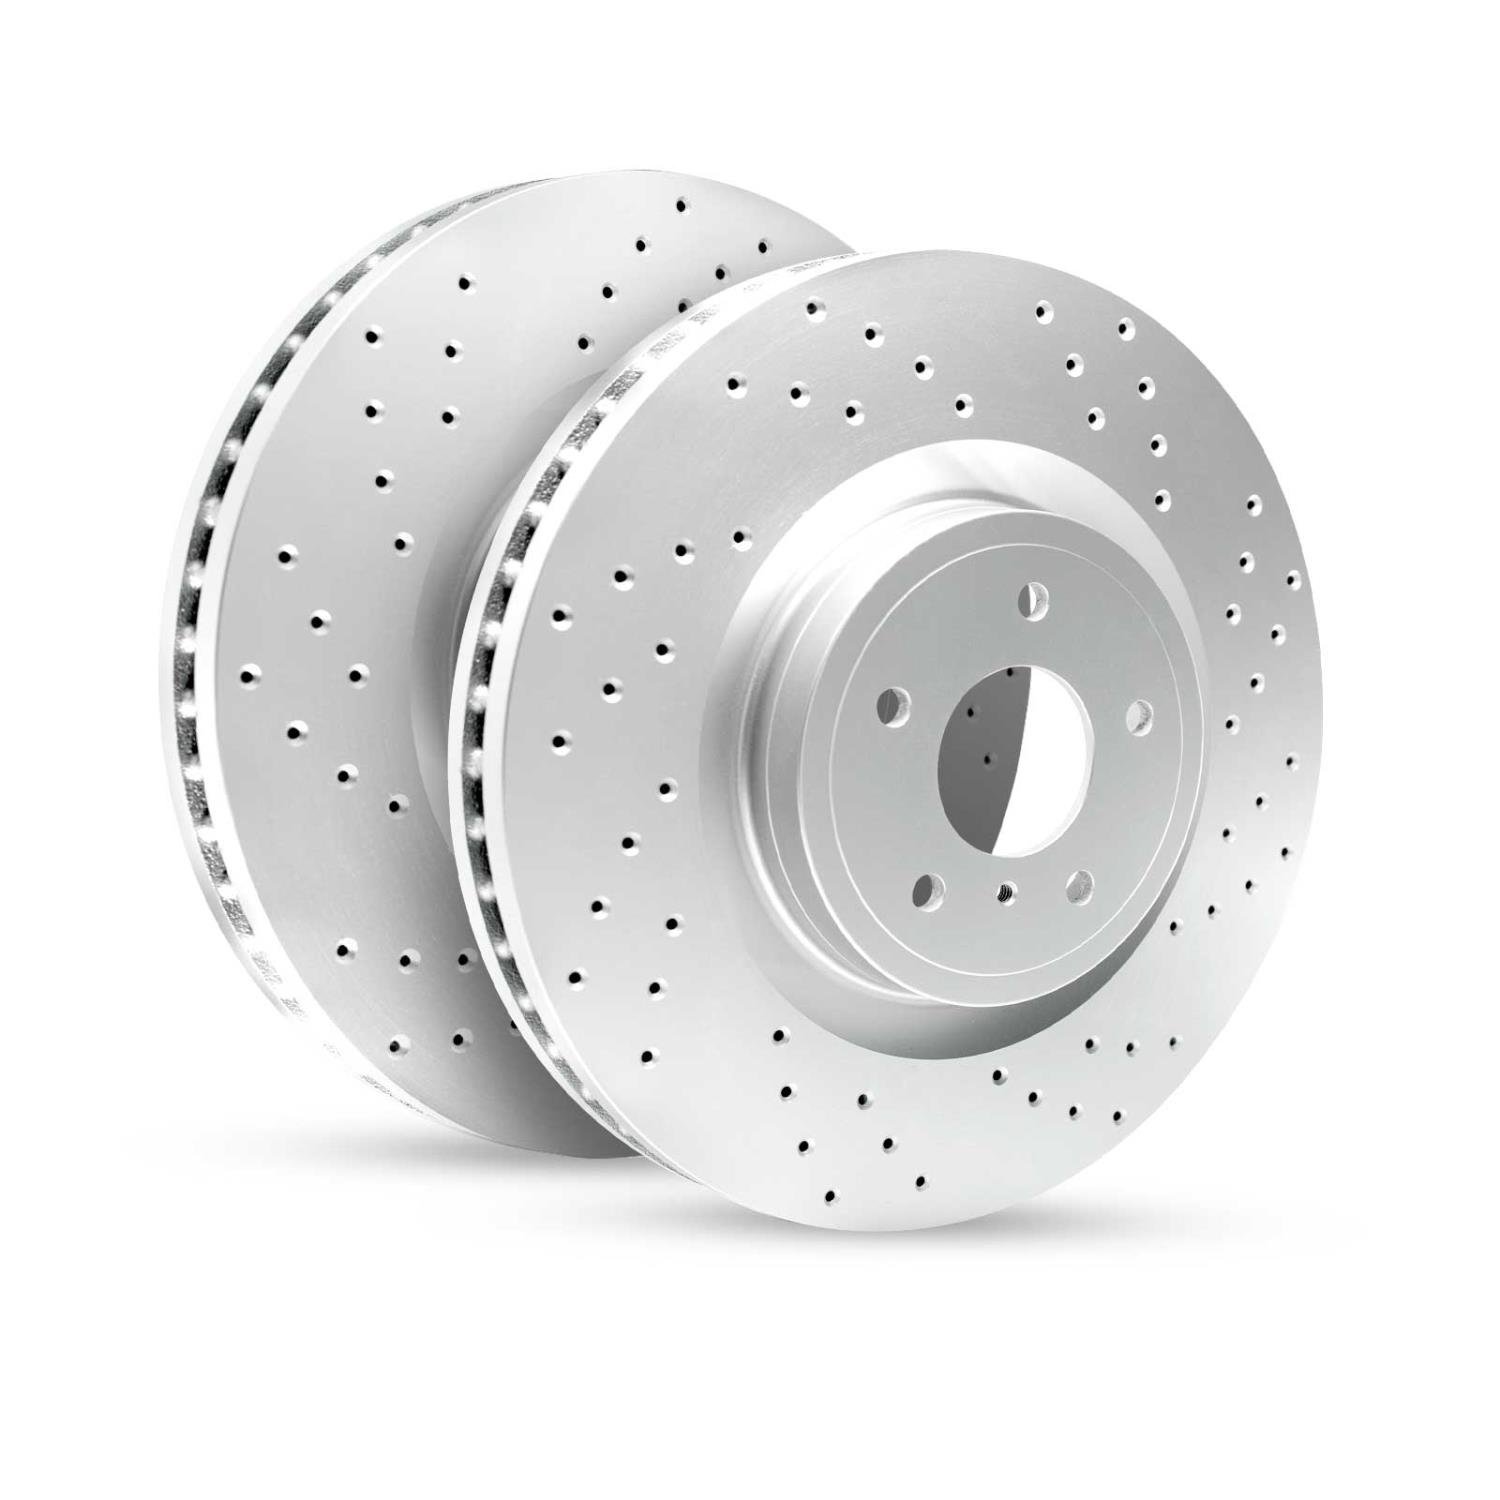 GEO-Carbon Drilled/Slotted Rotors, 2009-2013 Fits Multiple Makes/Models, Position: Rear